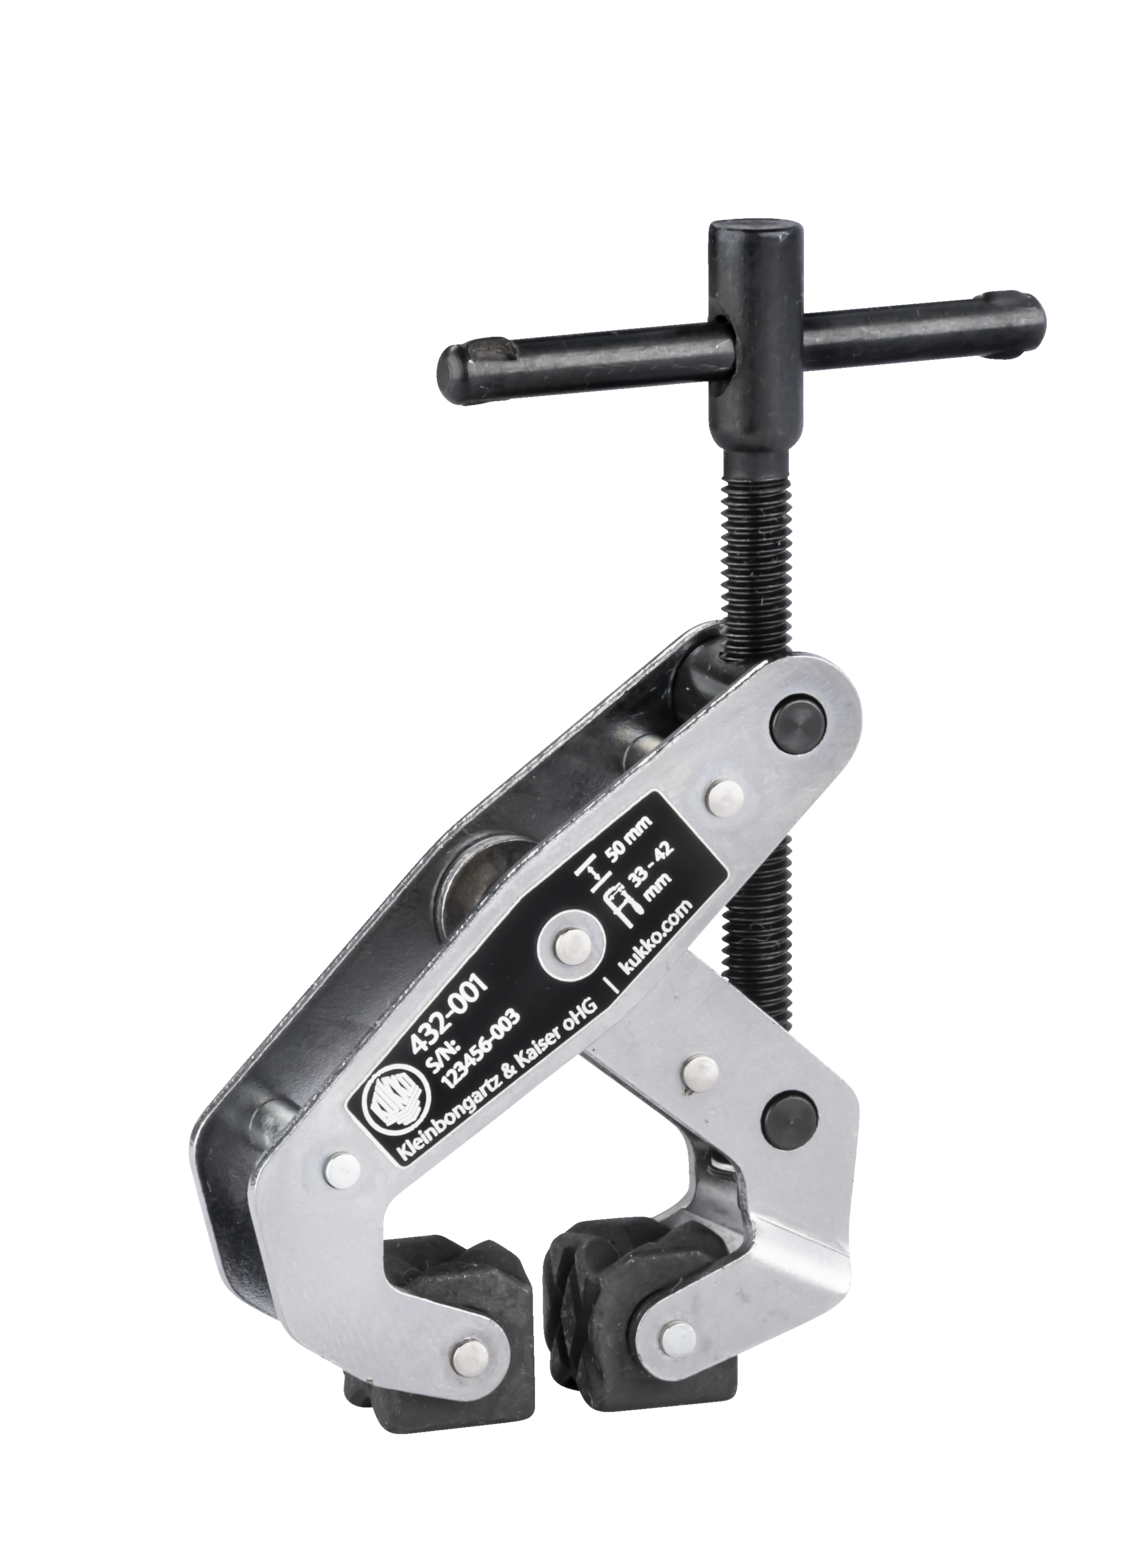 A parallel clamp of the 432 series for universal internal and external clamping of a wide variety of workpiece shapes